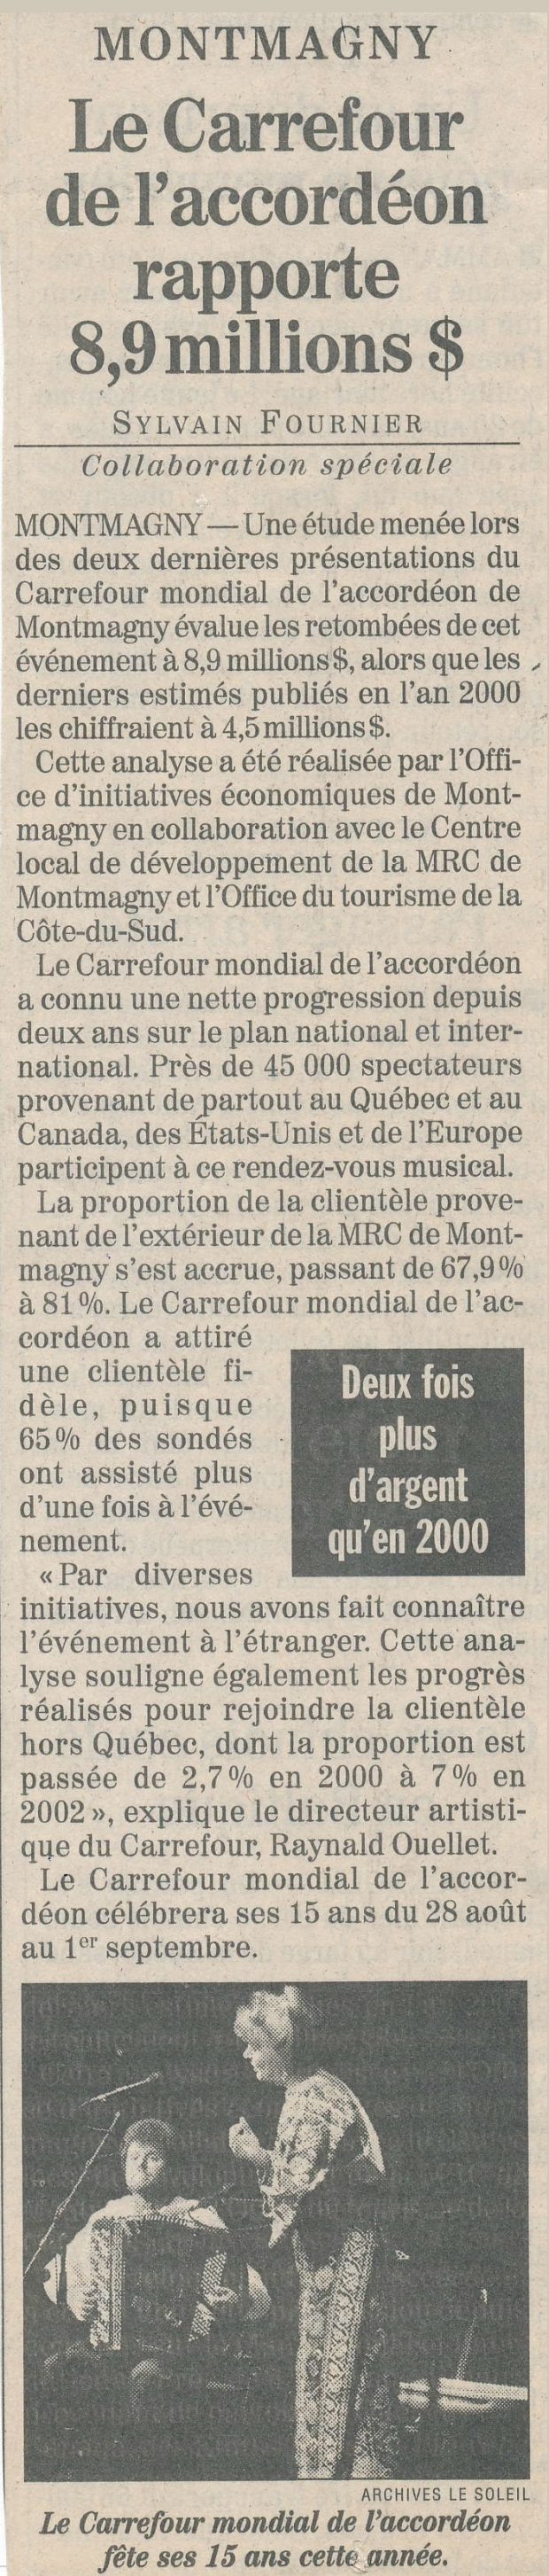 Newspaper article published in Le Soleil, titled The Carrefour mondial de l’accordéon Brings in $8.9 Million